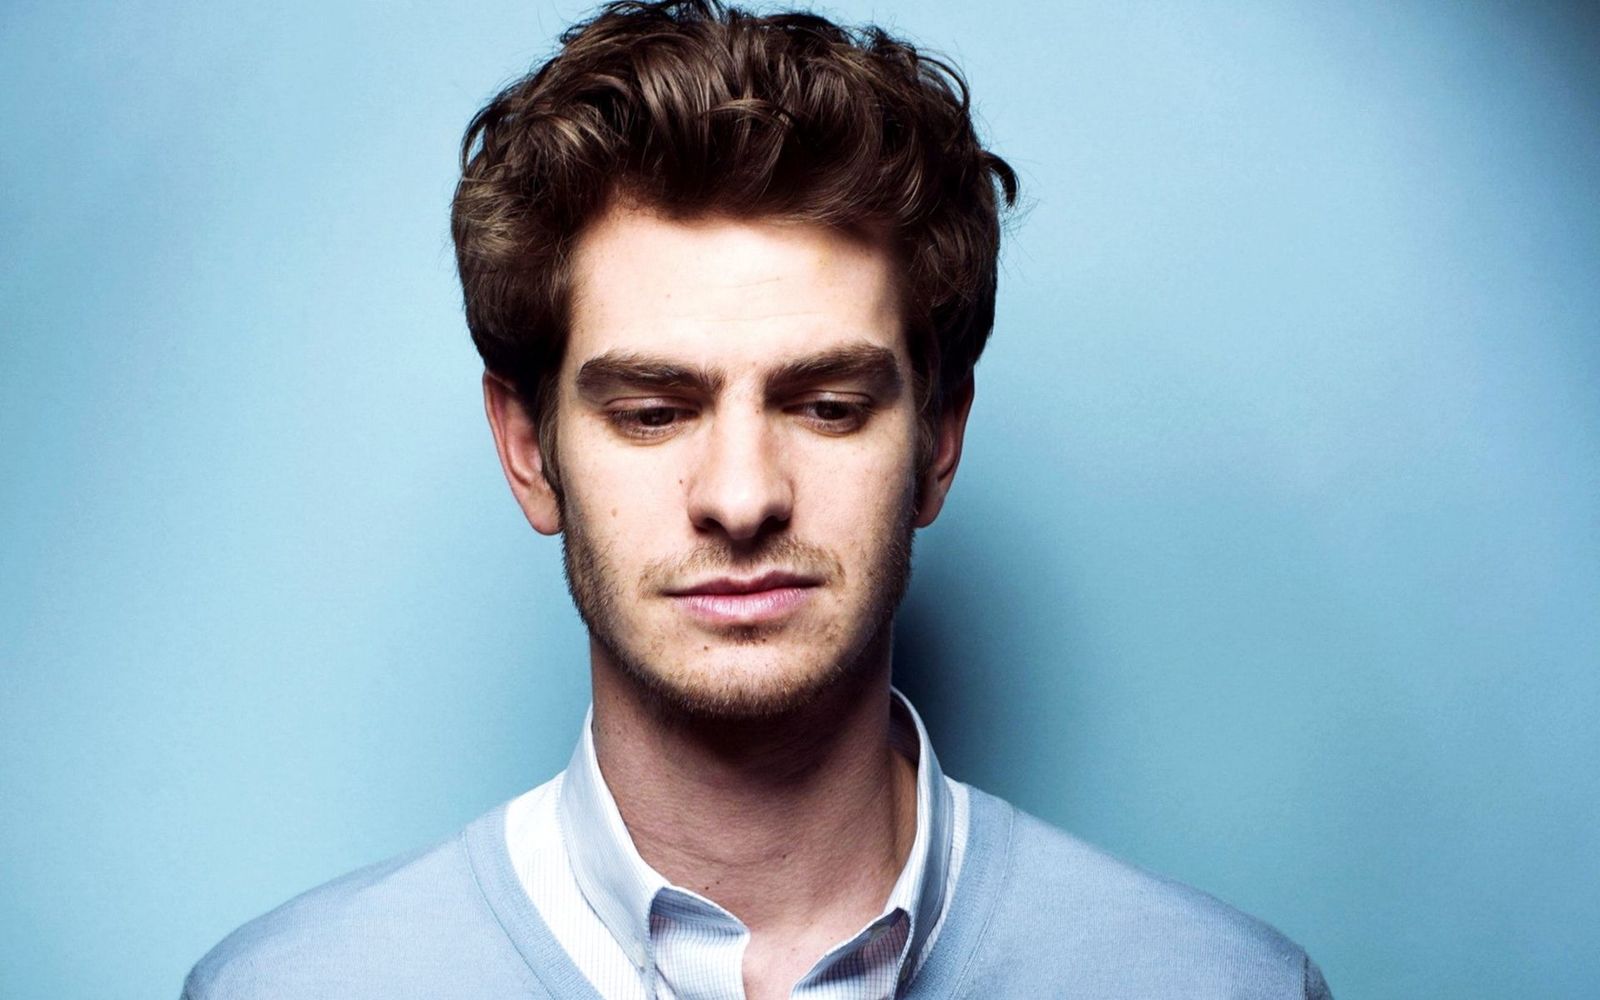 Andrew Garfield ‘not accepted’ In Today's Culture